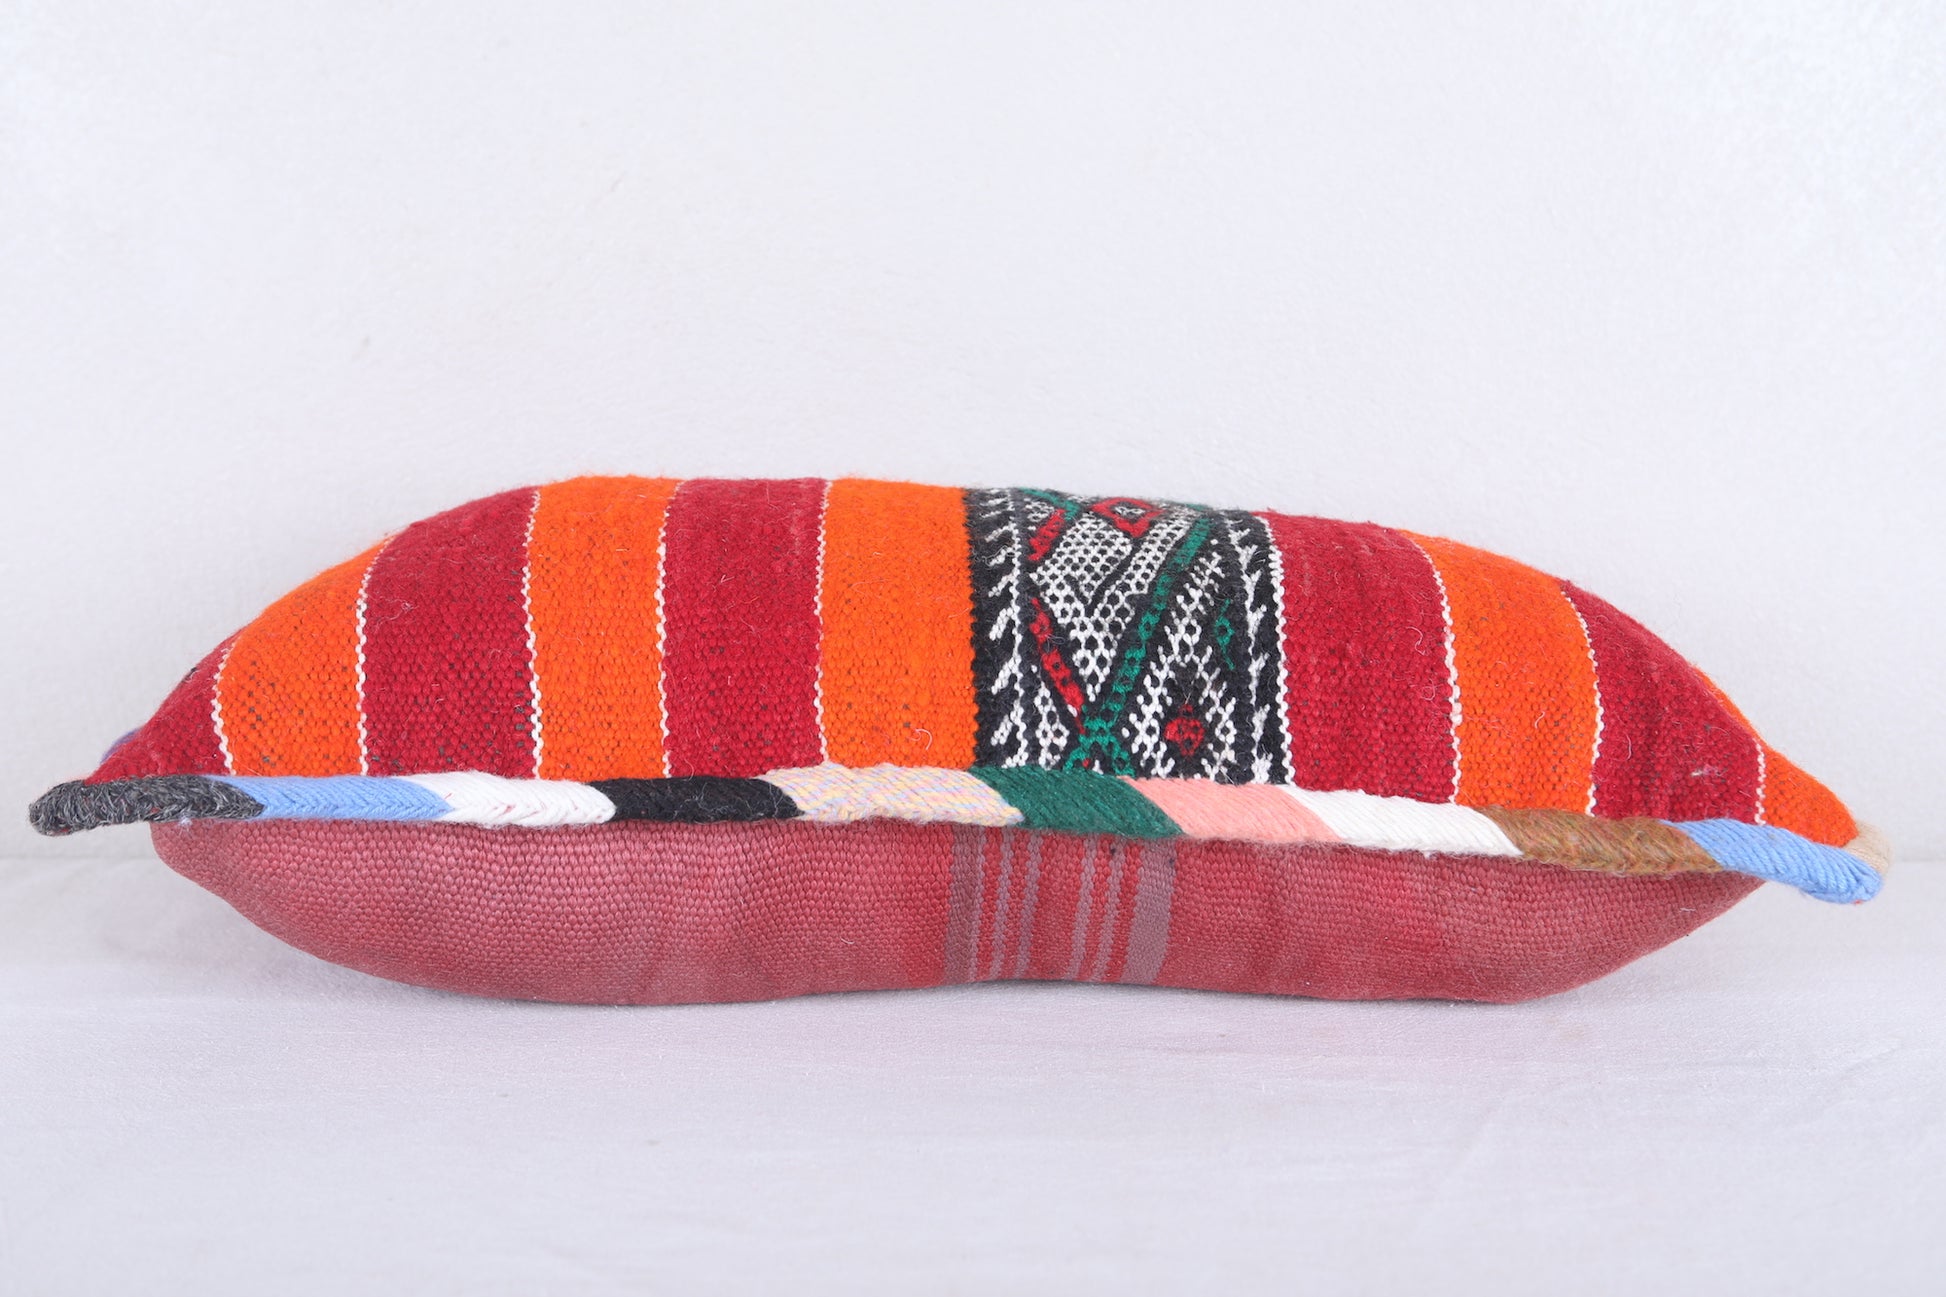 Vintage moroccan handwoven kilim pillow 13.7 INCHES X 23.6 INCHES